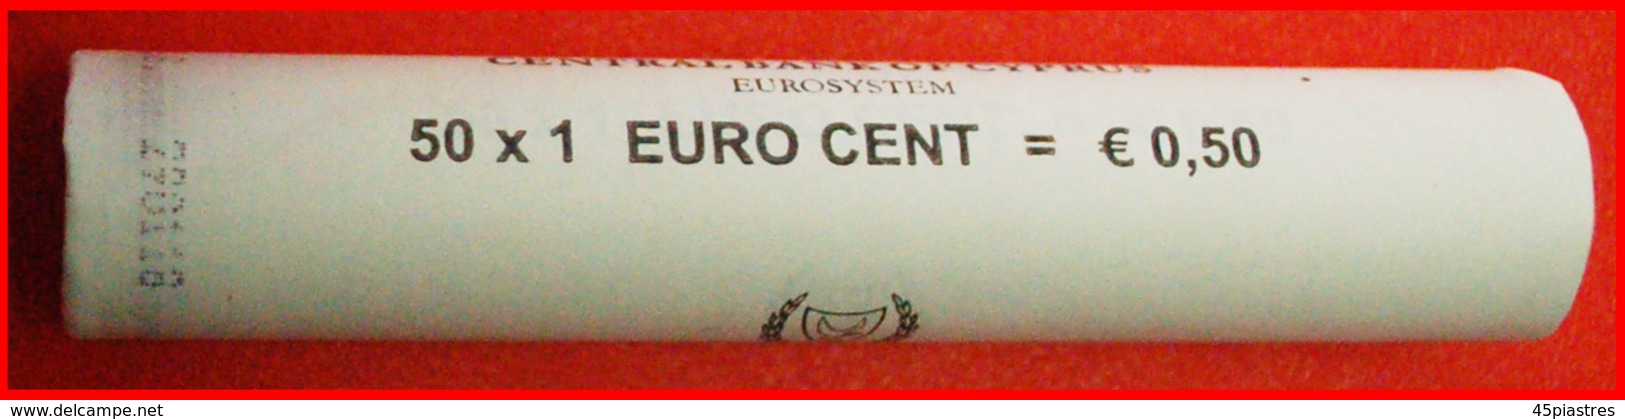 # GREECE: CYPRUS ★ 1 CENT 2018 UNC ROLL! LOW START ★ NO RESERVE! - Rouleaux